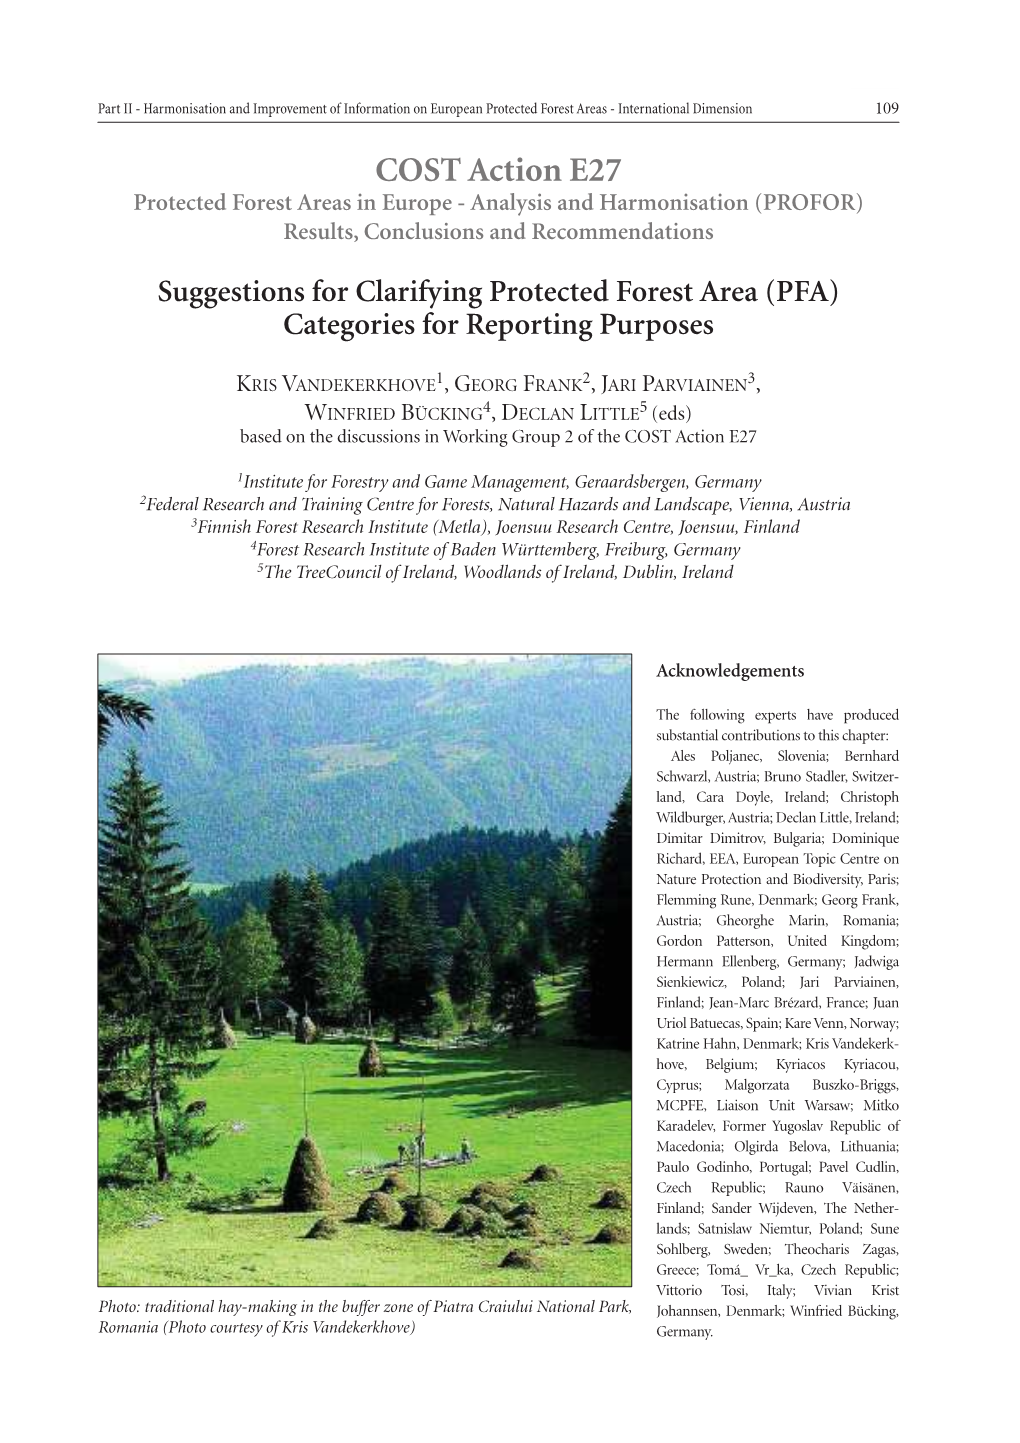 COST Action E27 Protected Forest Areas in Europe - Analysis and Harmonisation (PROFOR) Results, Conclusions and Recommendations